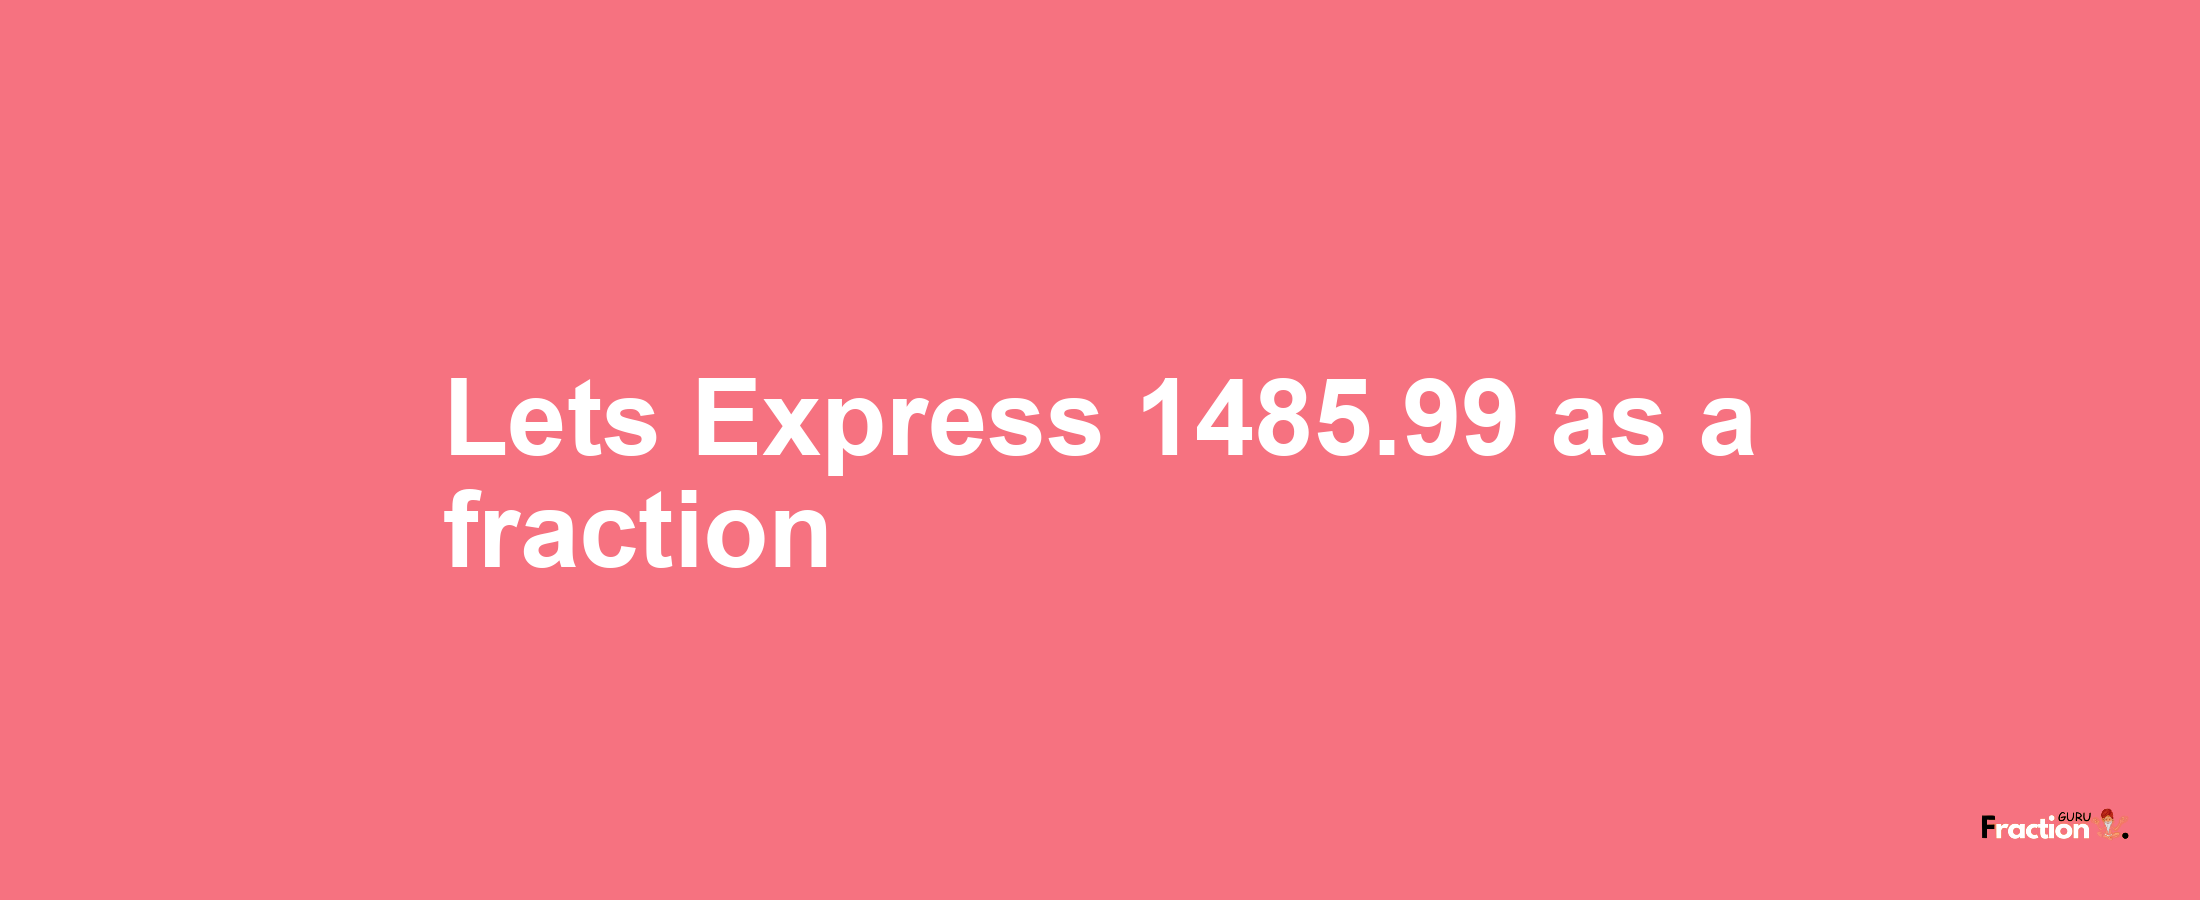 Lets Express 1485.99 as afraction